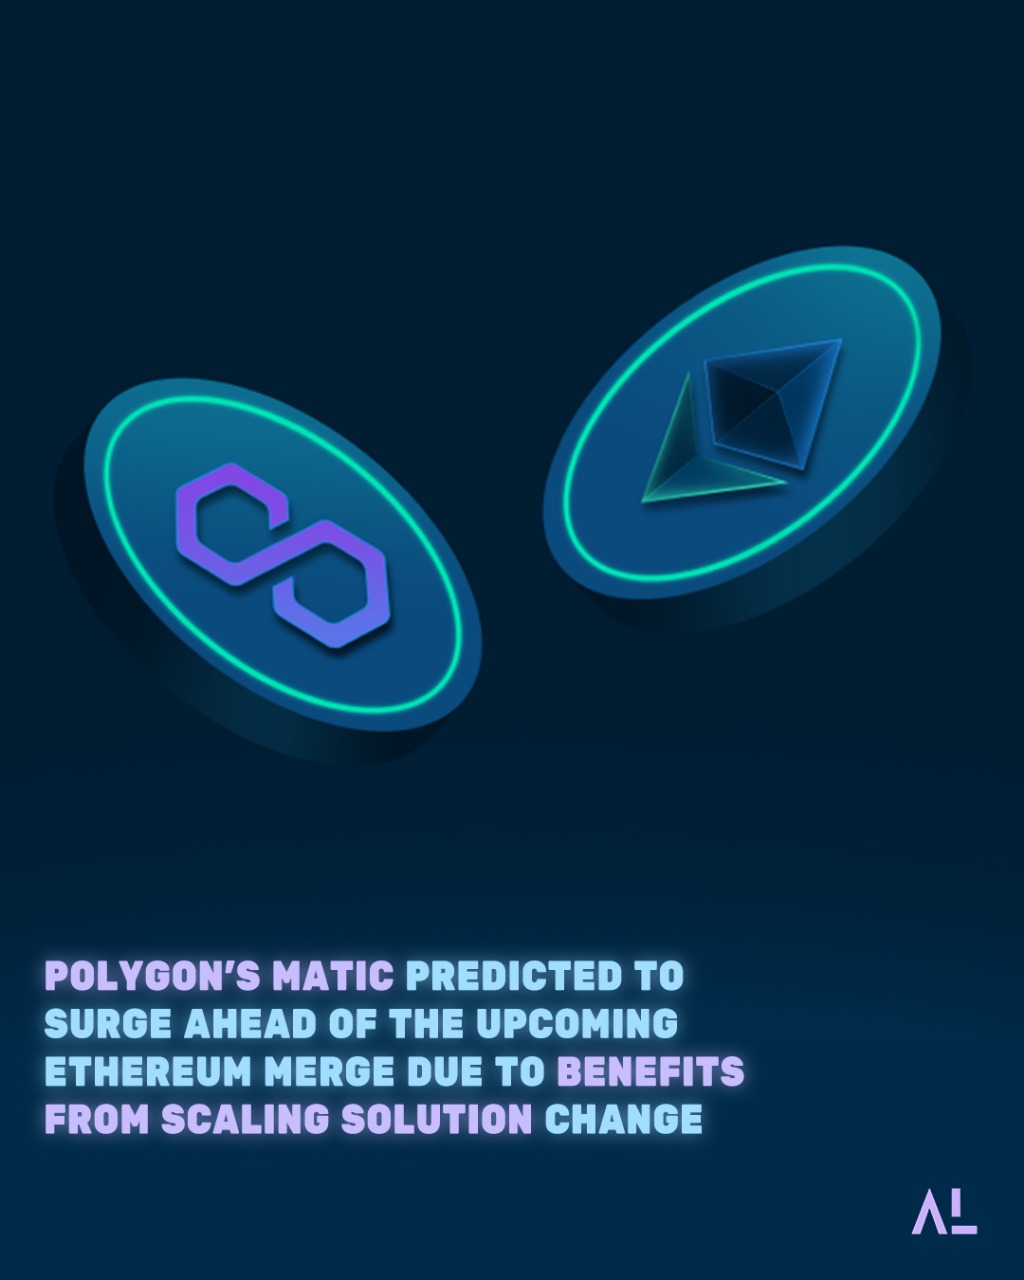  Polygon MATIC Projected To Surge Ahead Of ETH Merge Next Month